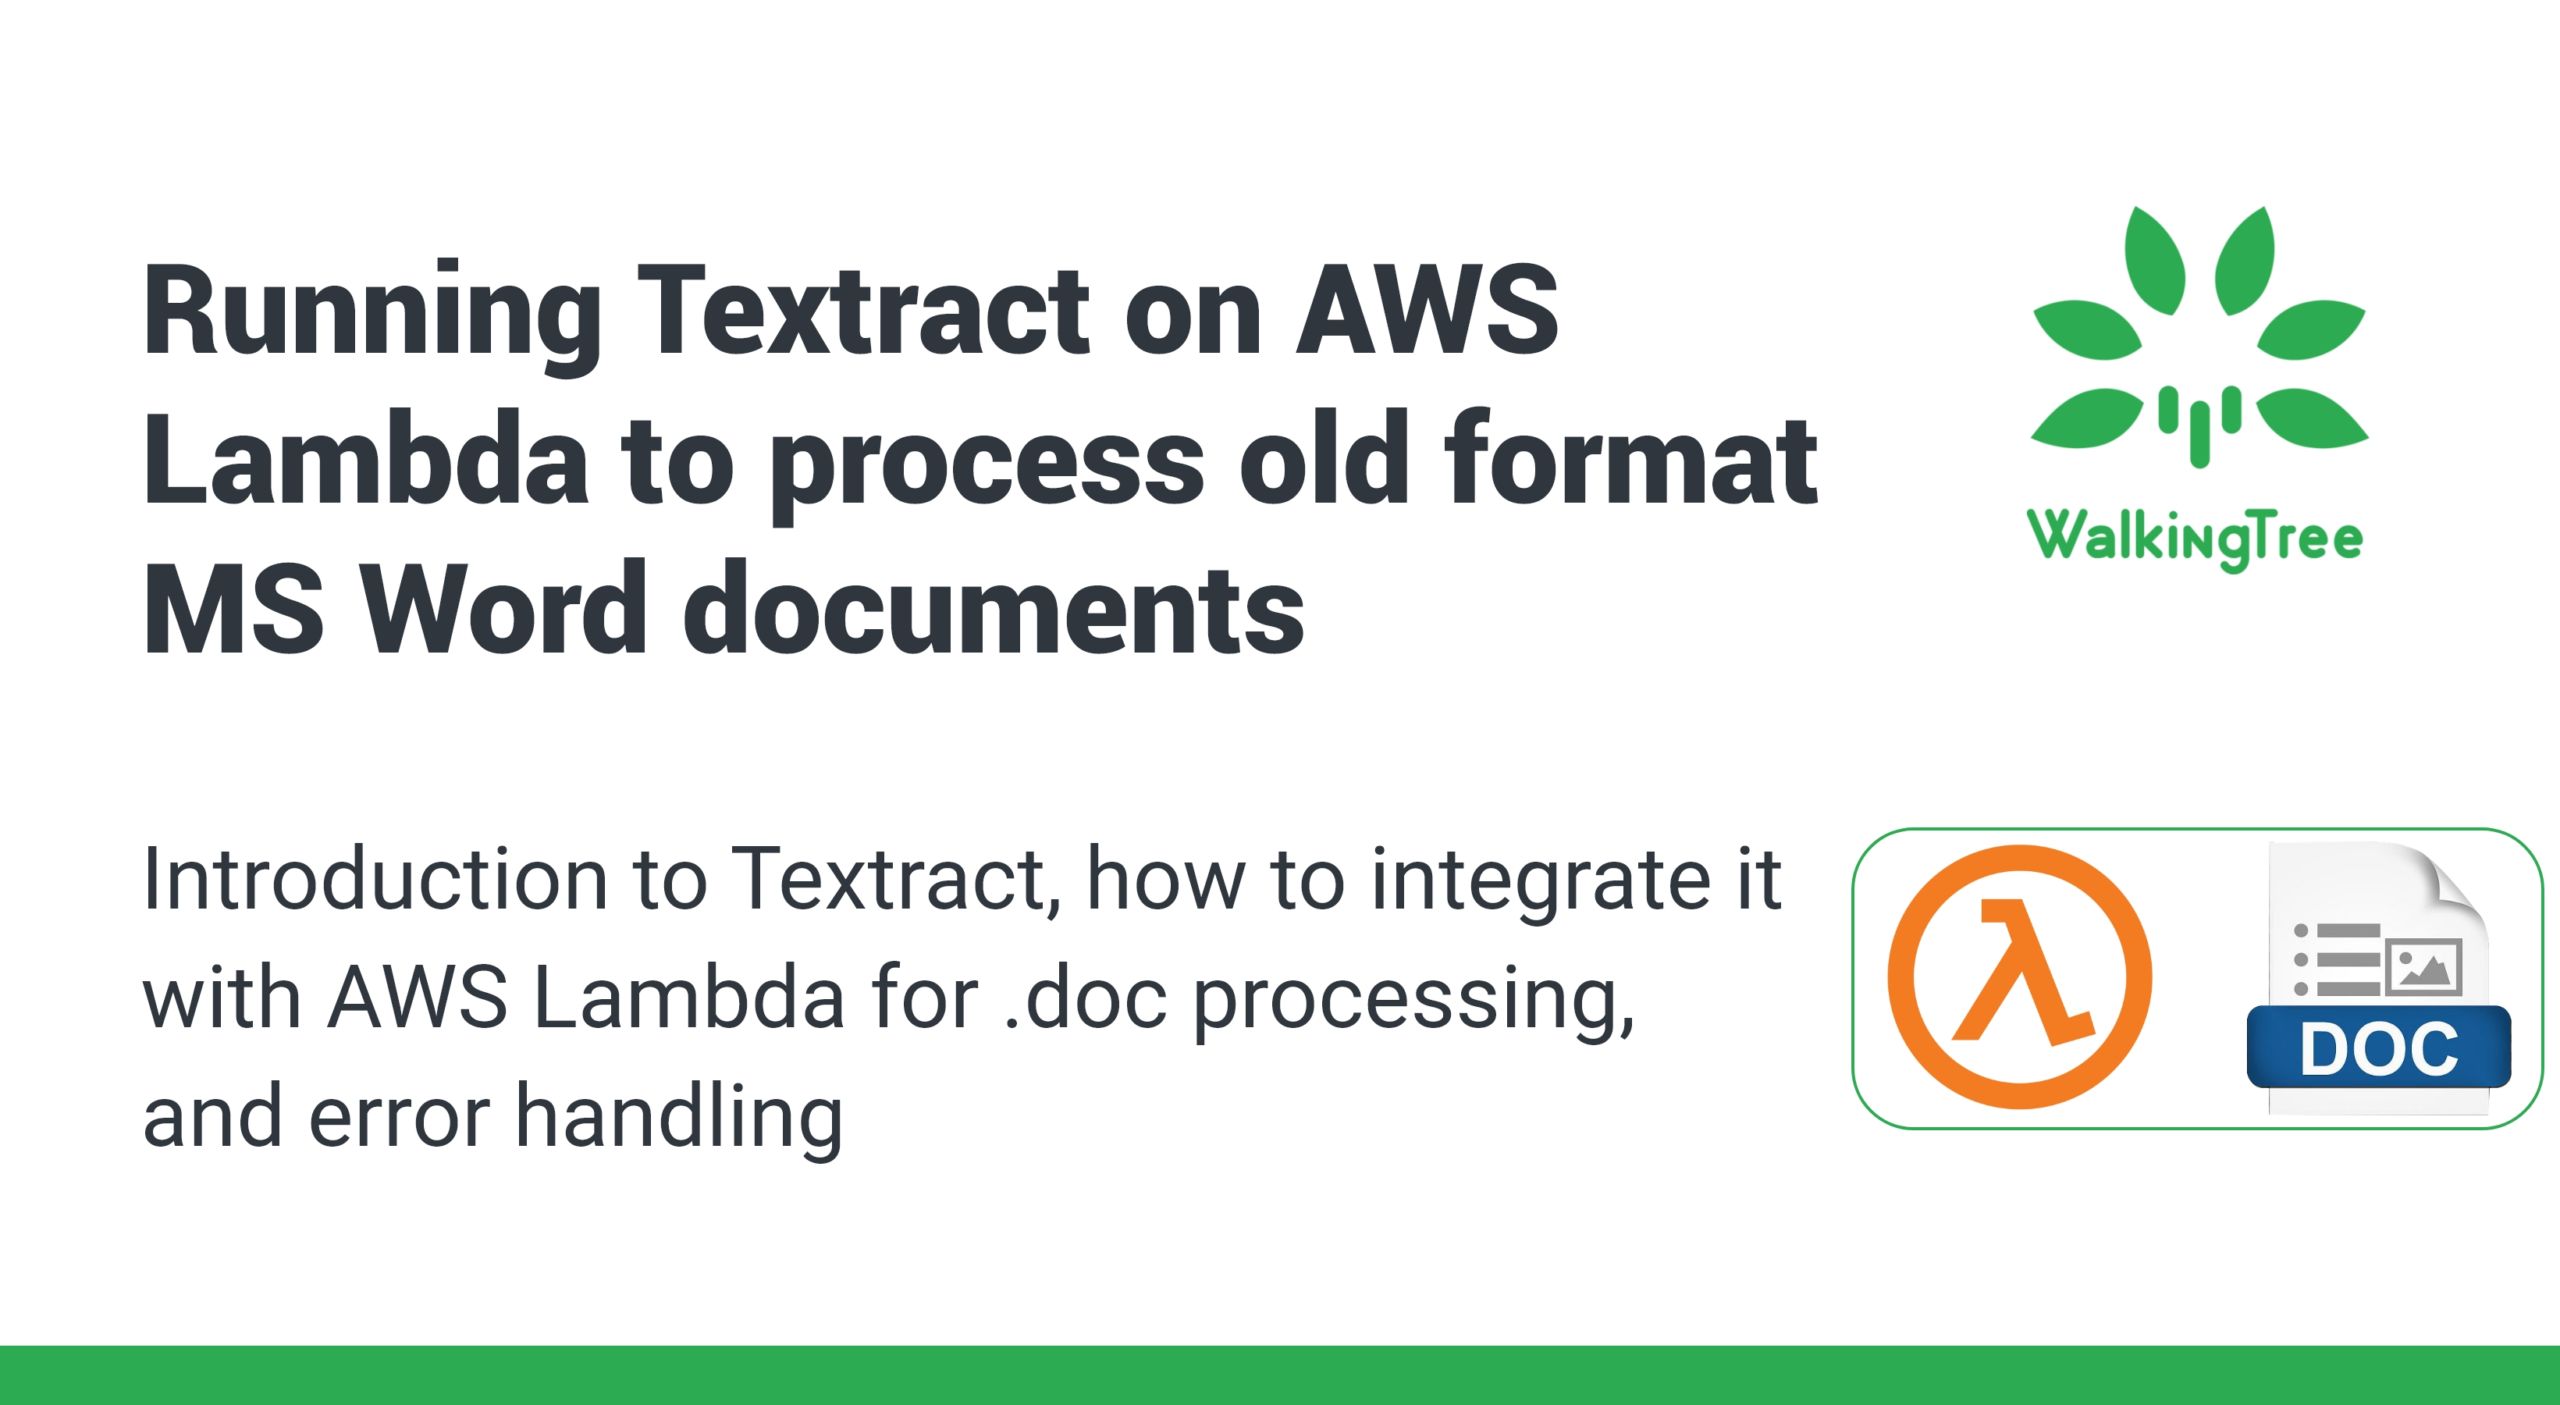 Resolving Challenges in Processing of Old Format Microsoft Word Documents on AWS Lambda